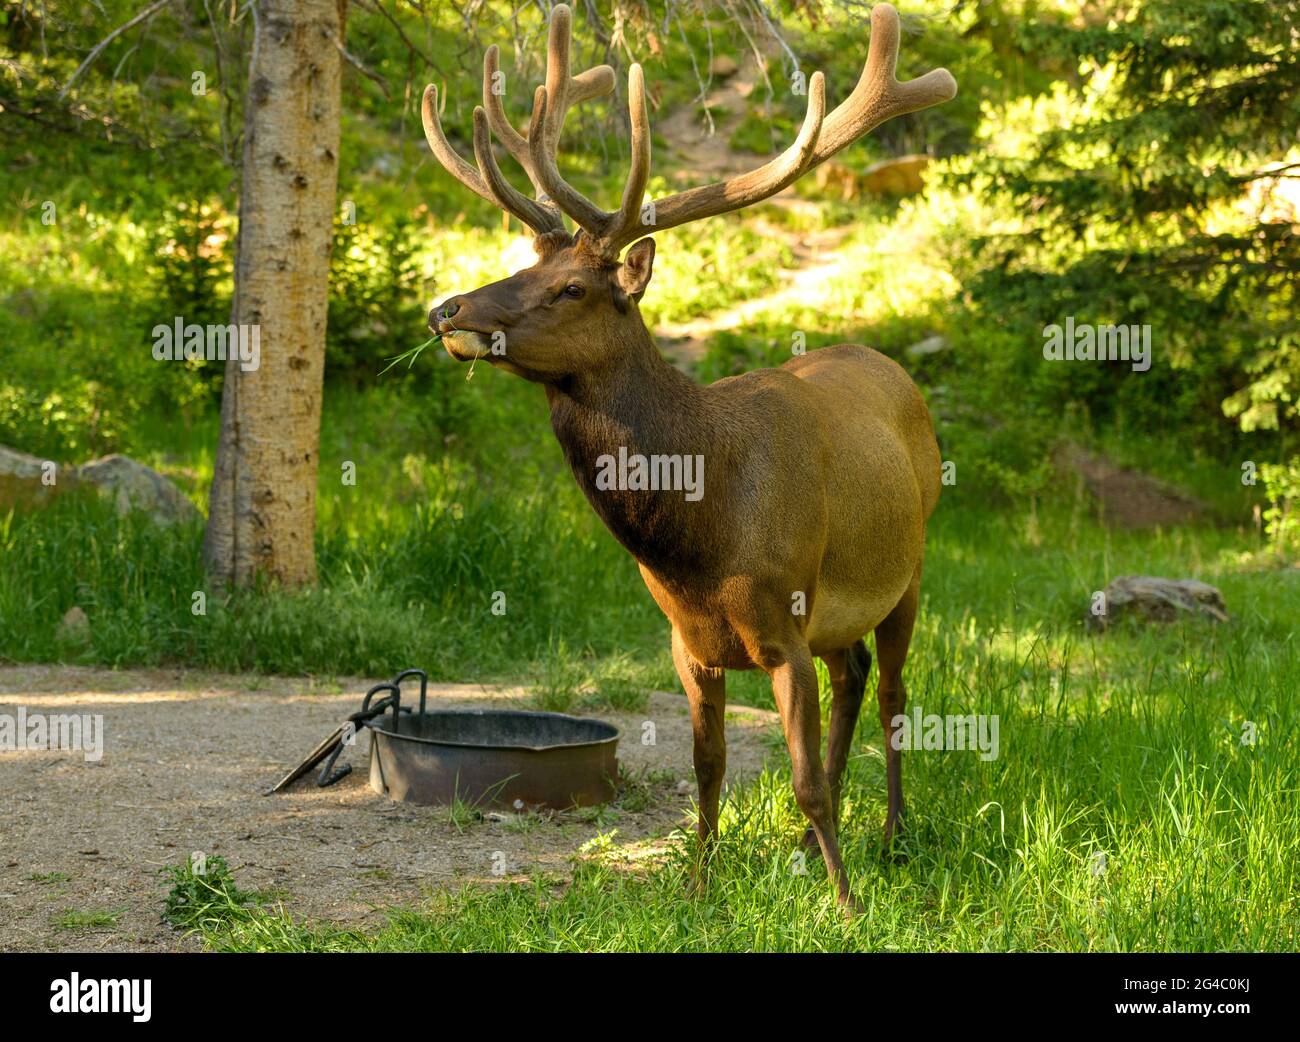 Bull Elk - A big bull elk grazing and wandering in a picnic area on a sunny Spring evening. Rocky Mountain National Park, Colorado, USA. Stock Photo